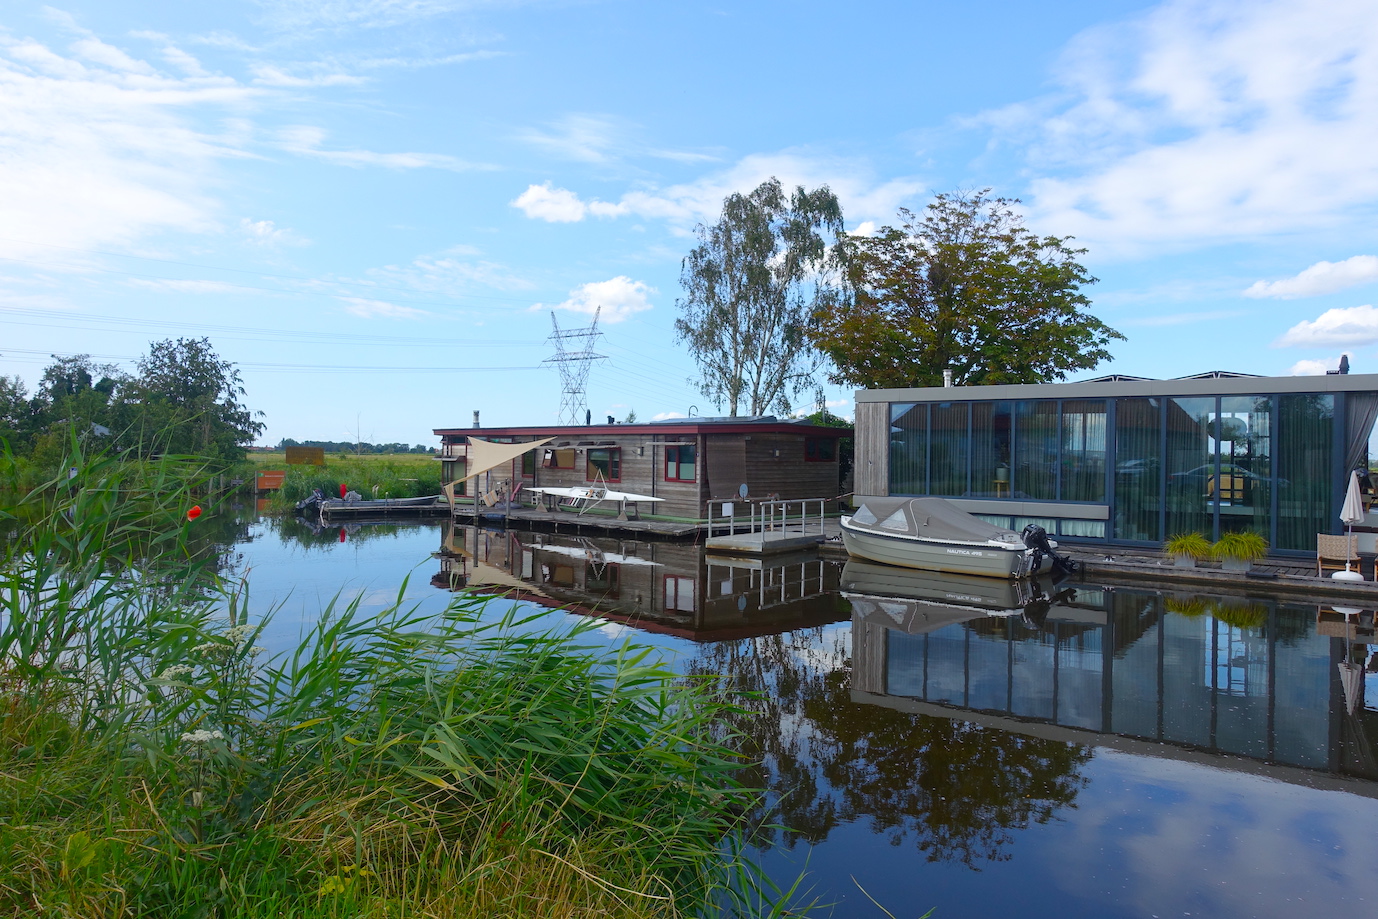 Houseboats with reflections on the water on the outskirts of Broek in Waterland